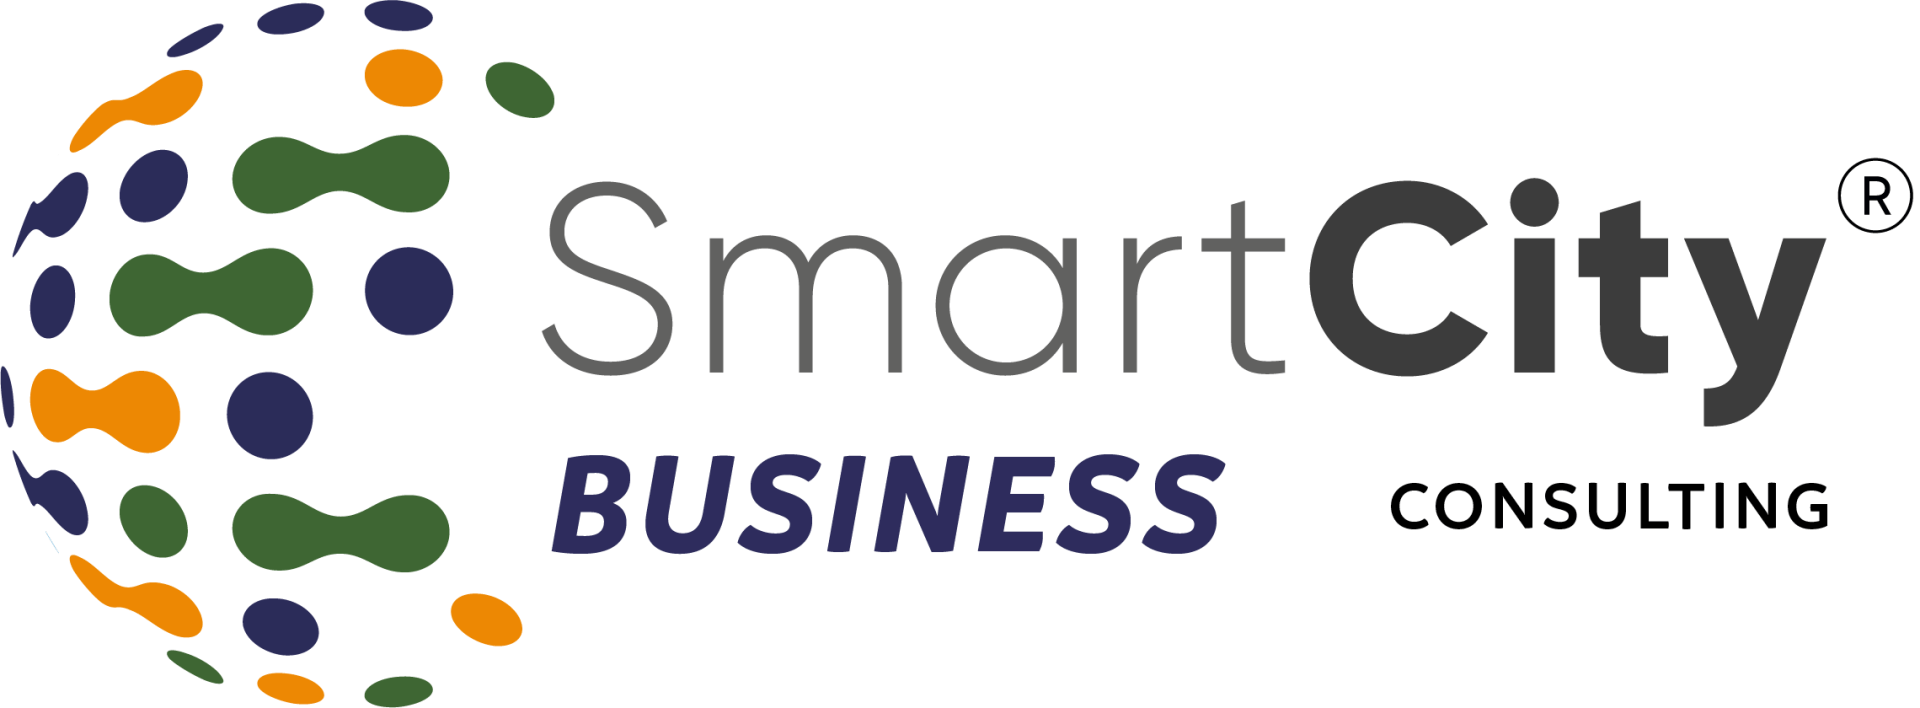 Smart City Business Consulting